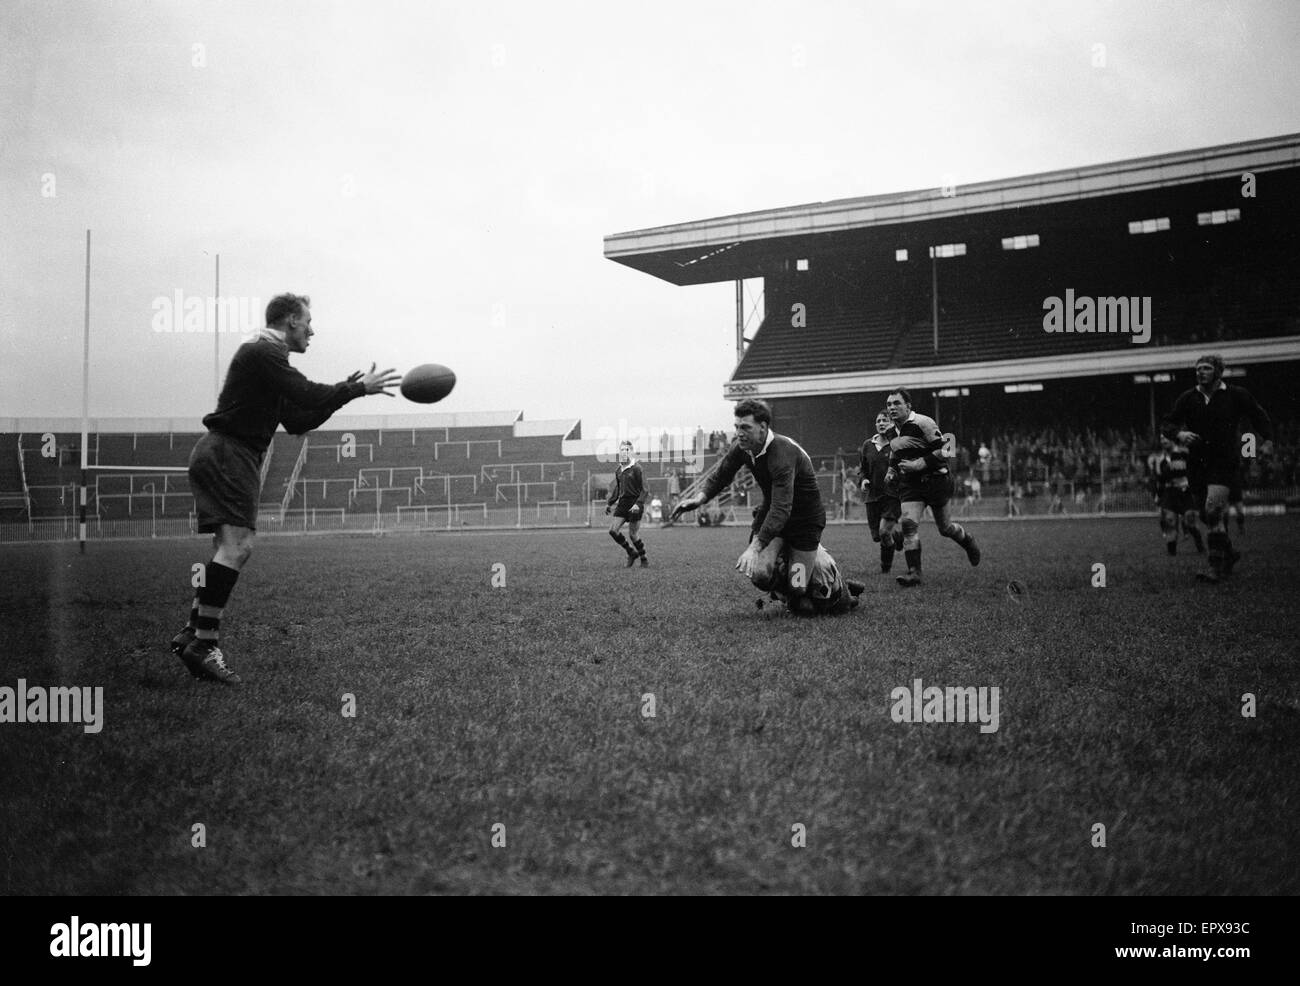 London Wasps v Cardiff Blues, Rugby Union match, dicembre 1959. Foto Stock